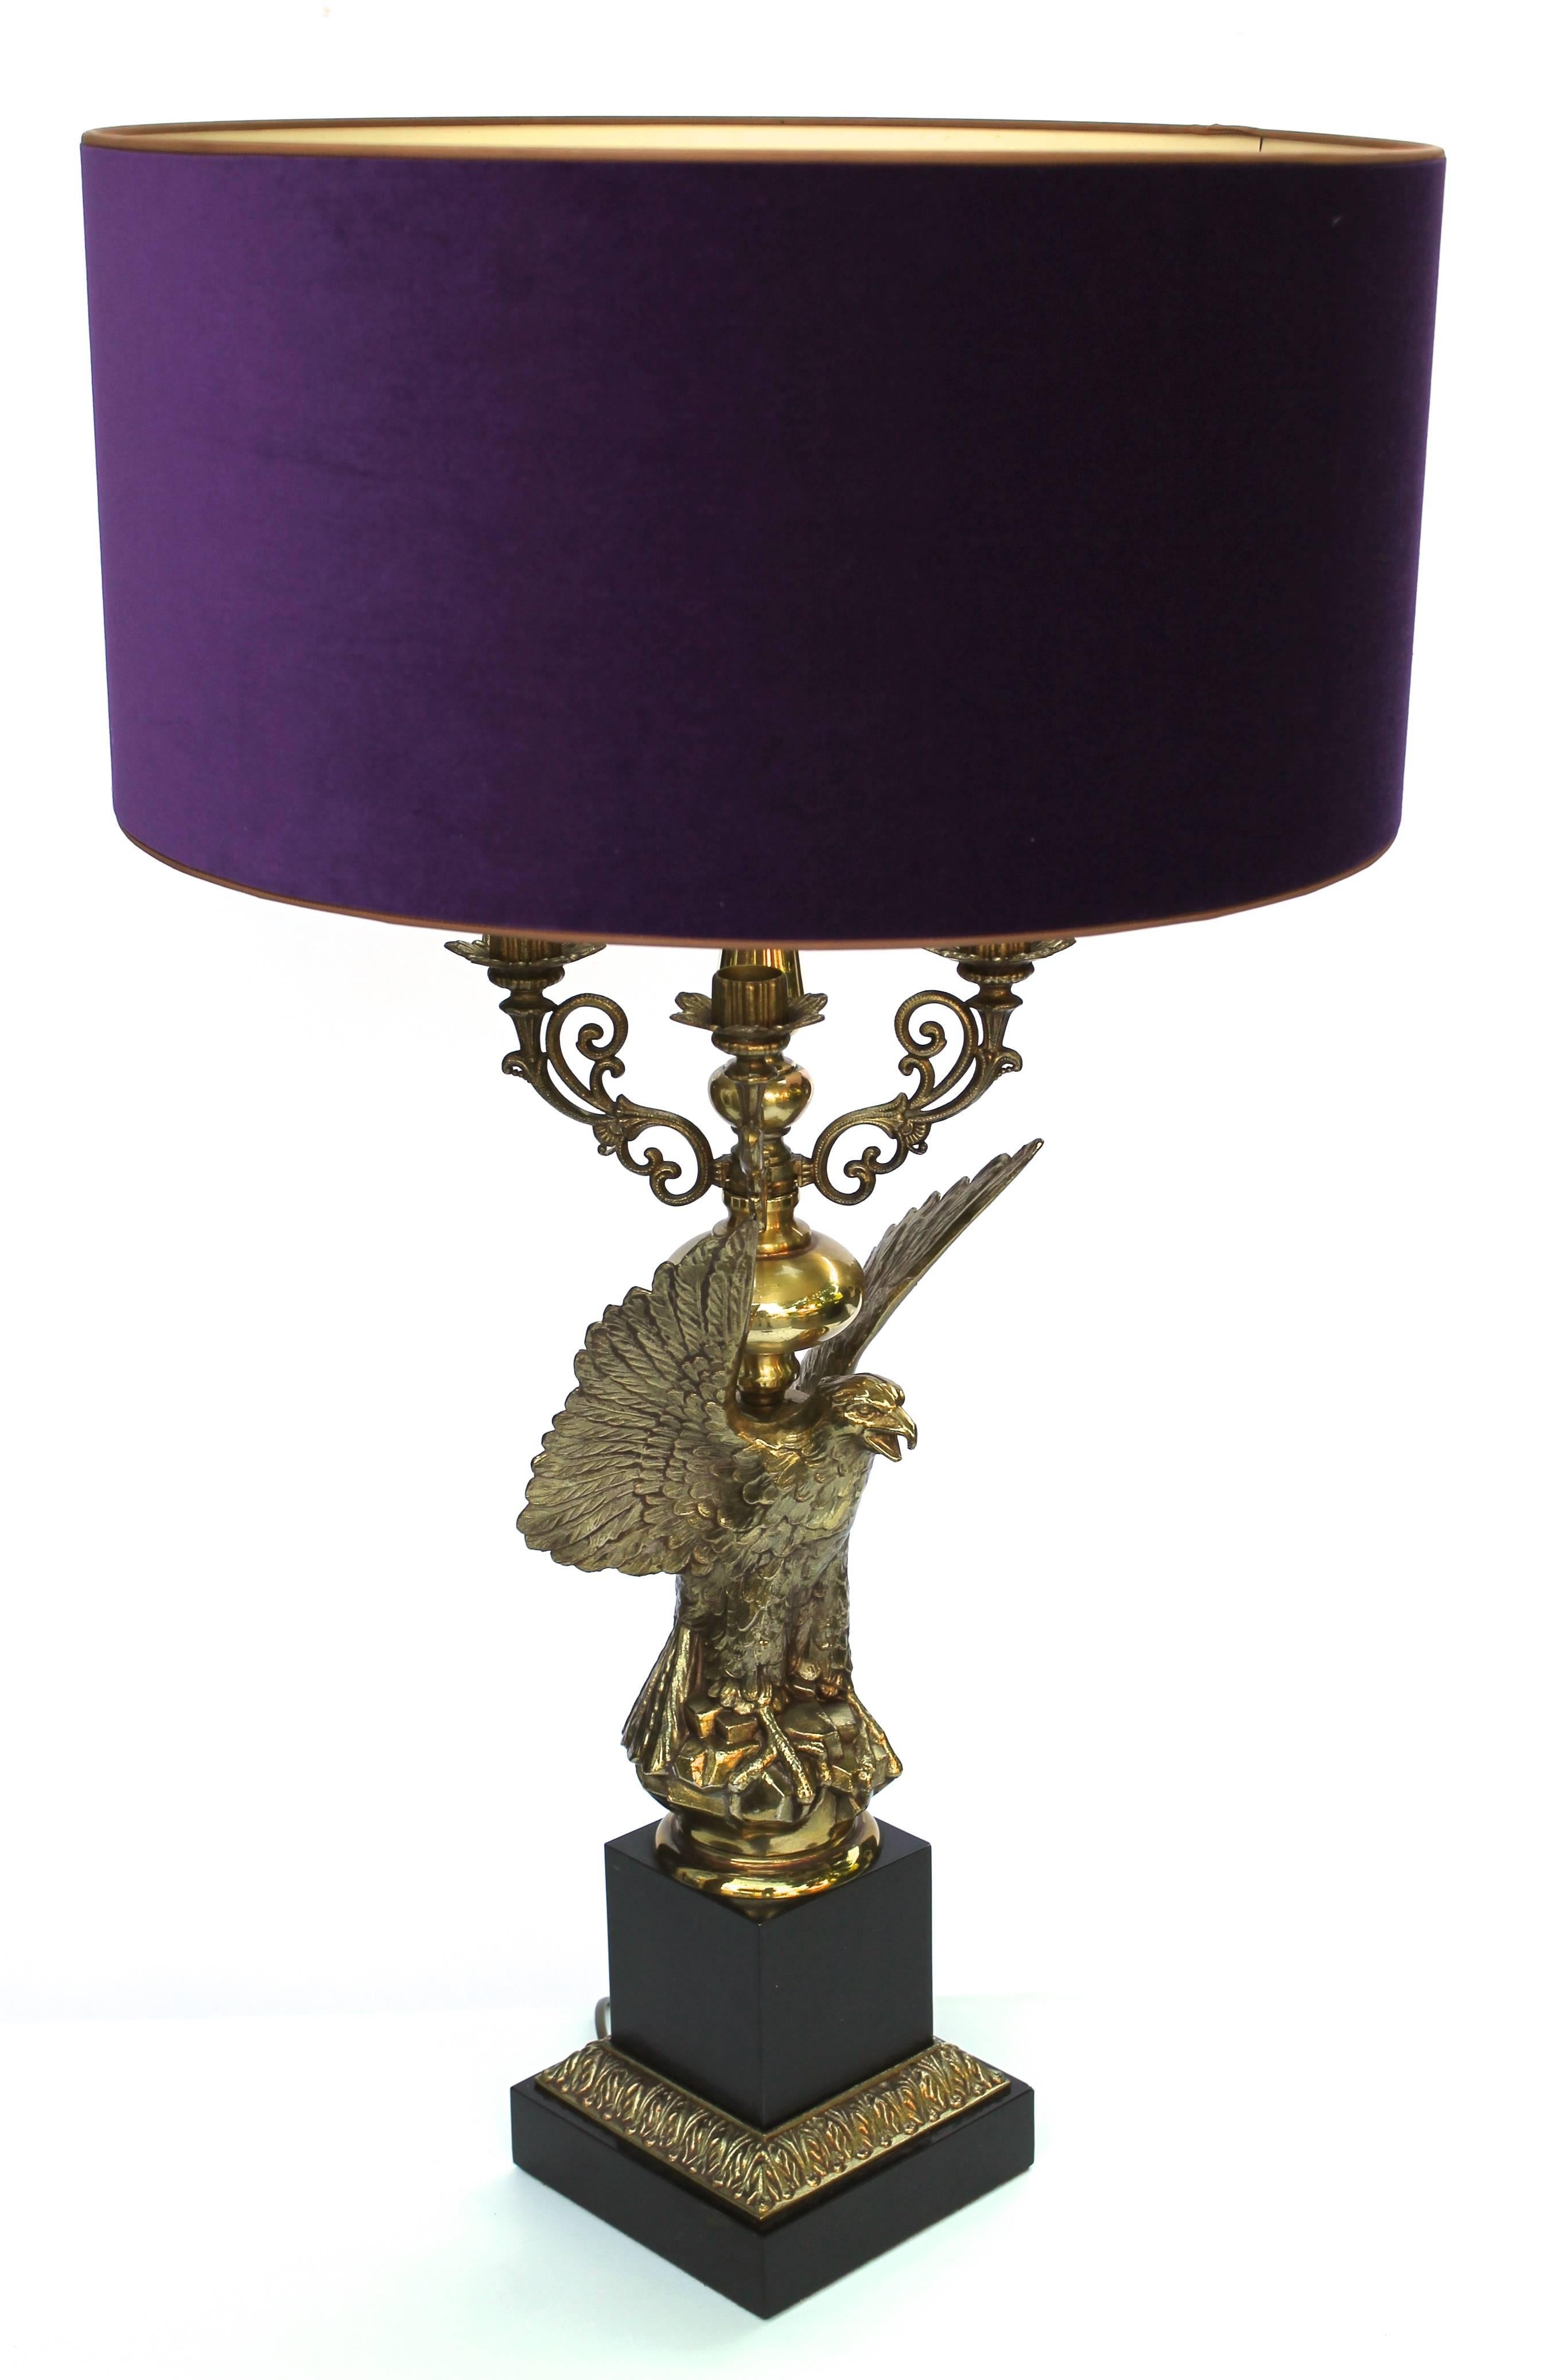 Eagle table lamp, designed by Jaques Charles in gild patinated bronze,
Paris, 1970s.